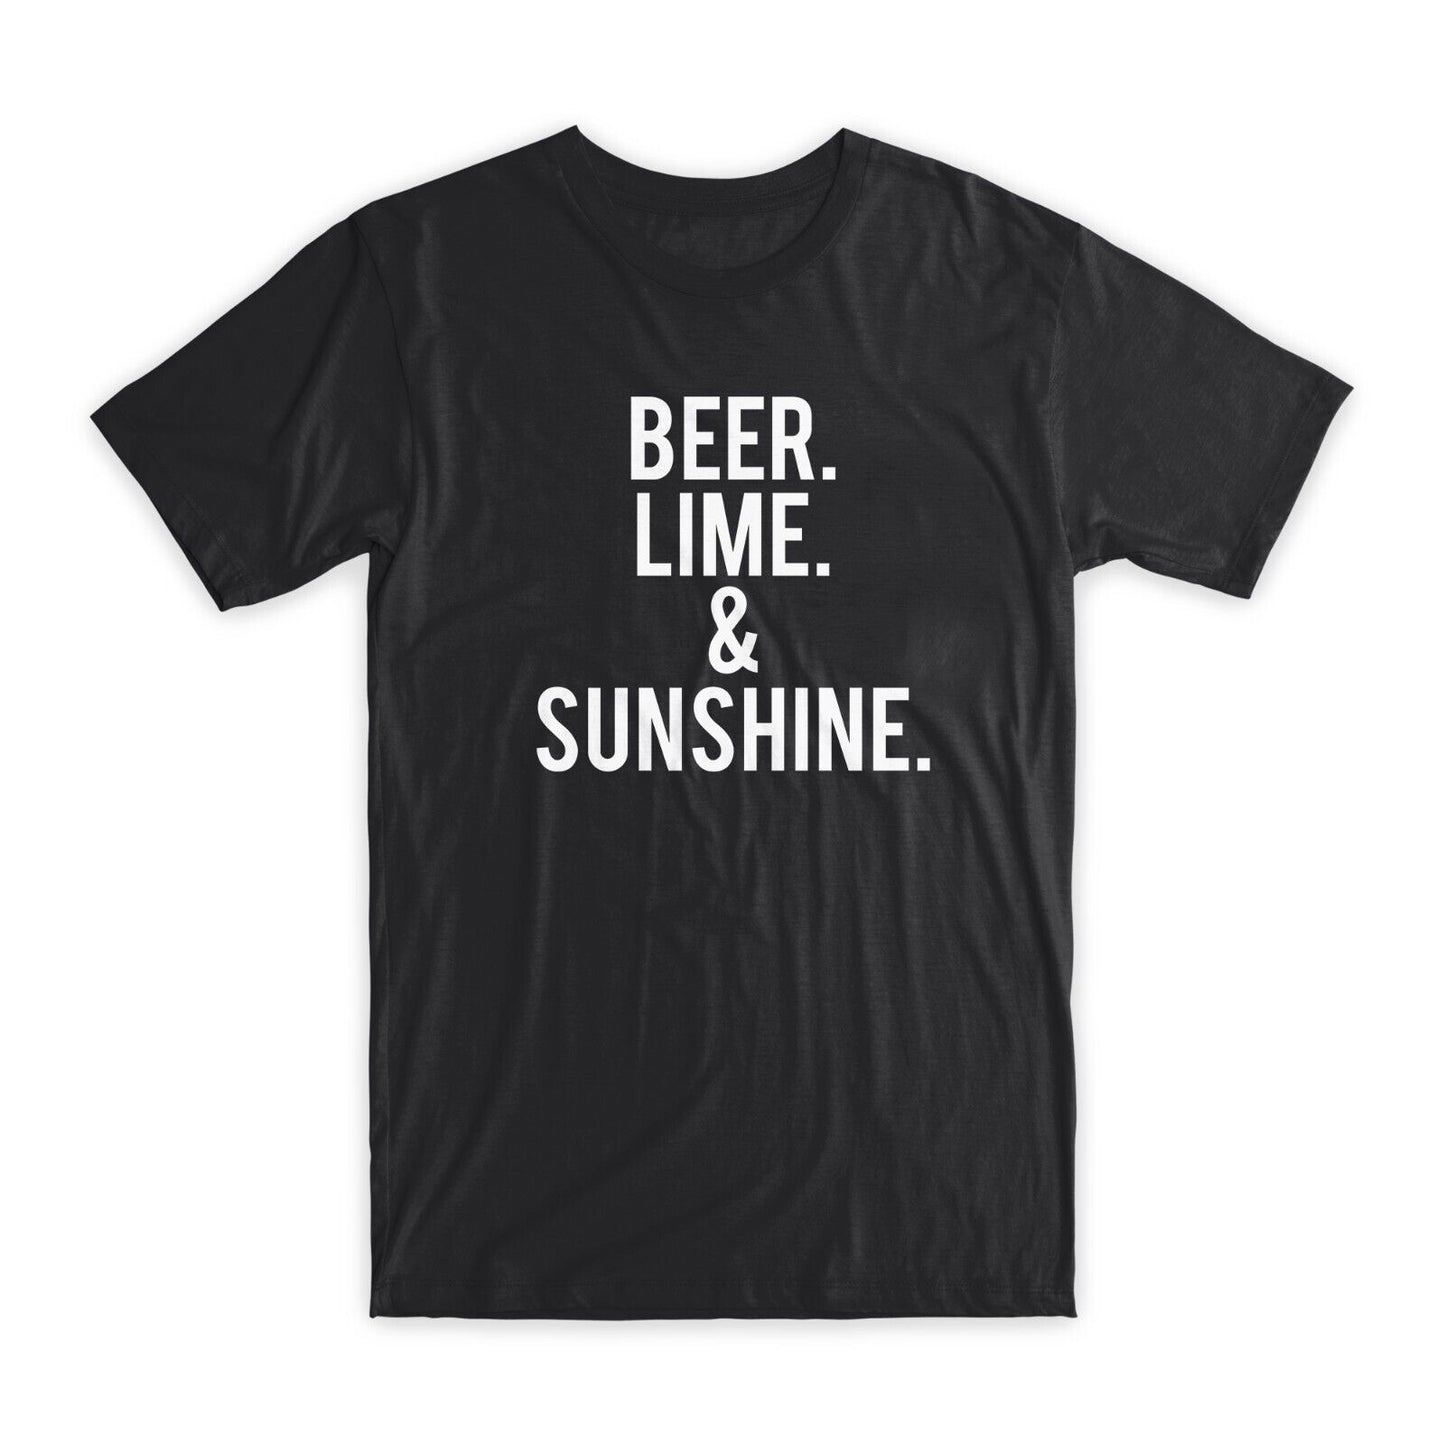 Beer Lime & Shunshine T-Shirt Premium Soft Cotton Funny Tees Novelty Gift NEW